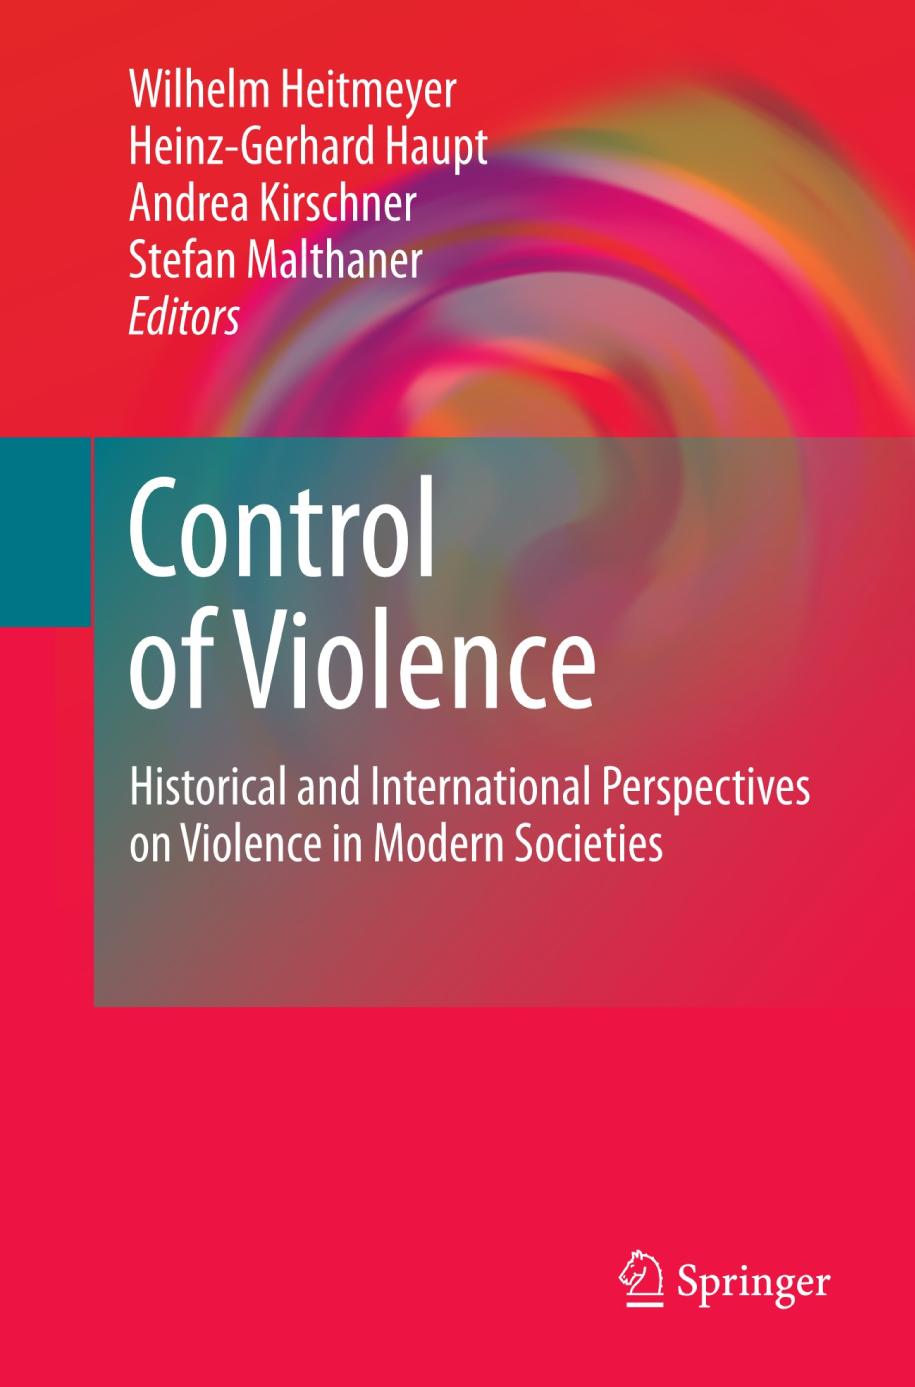 Control of violence : historical and international perspectives on violence in modern societies